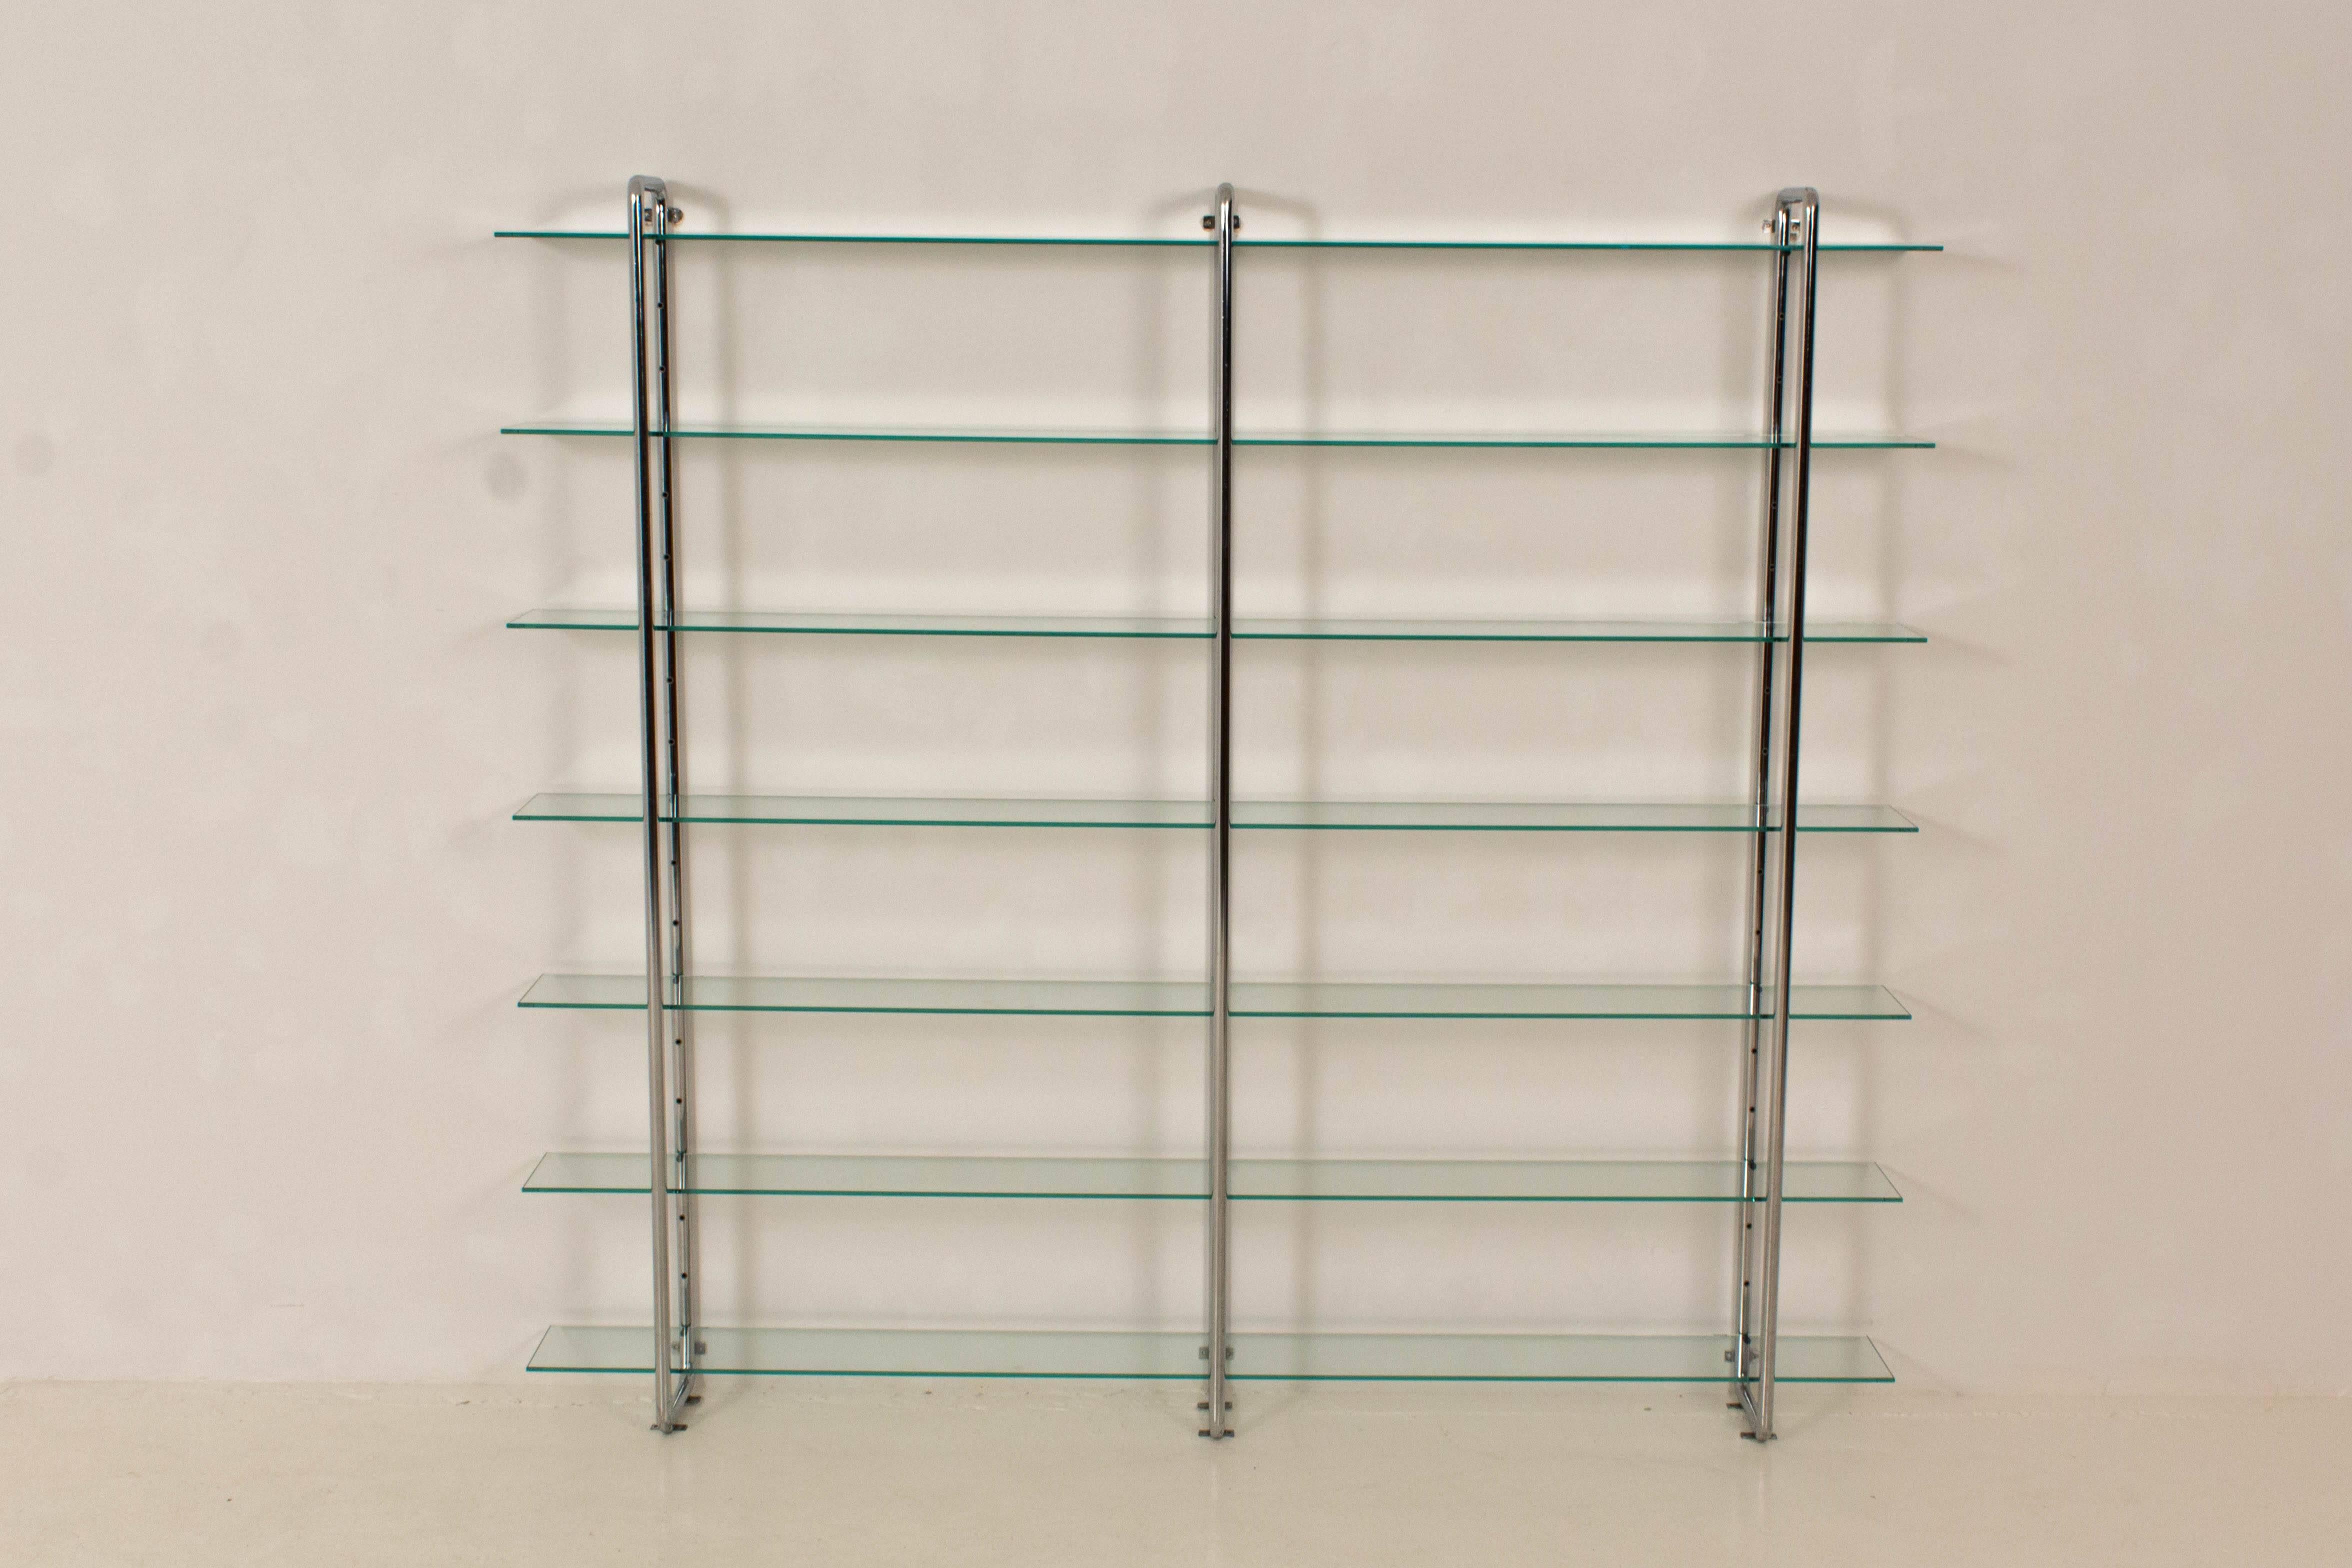 Impressive and rare Art Deco shelving unit, 1930s.
Original chrome tubular steel stands with seven glass shelves.
Shelving units like this are hard to find.
In good condition with minor wear consistent with age and use,
preserving a beautiful